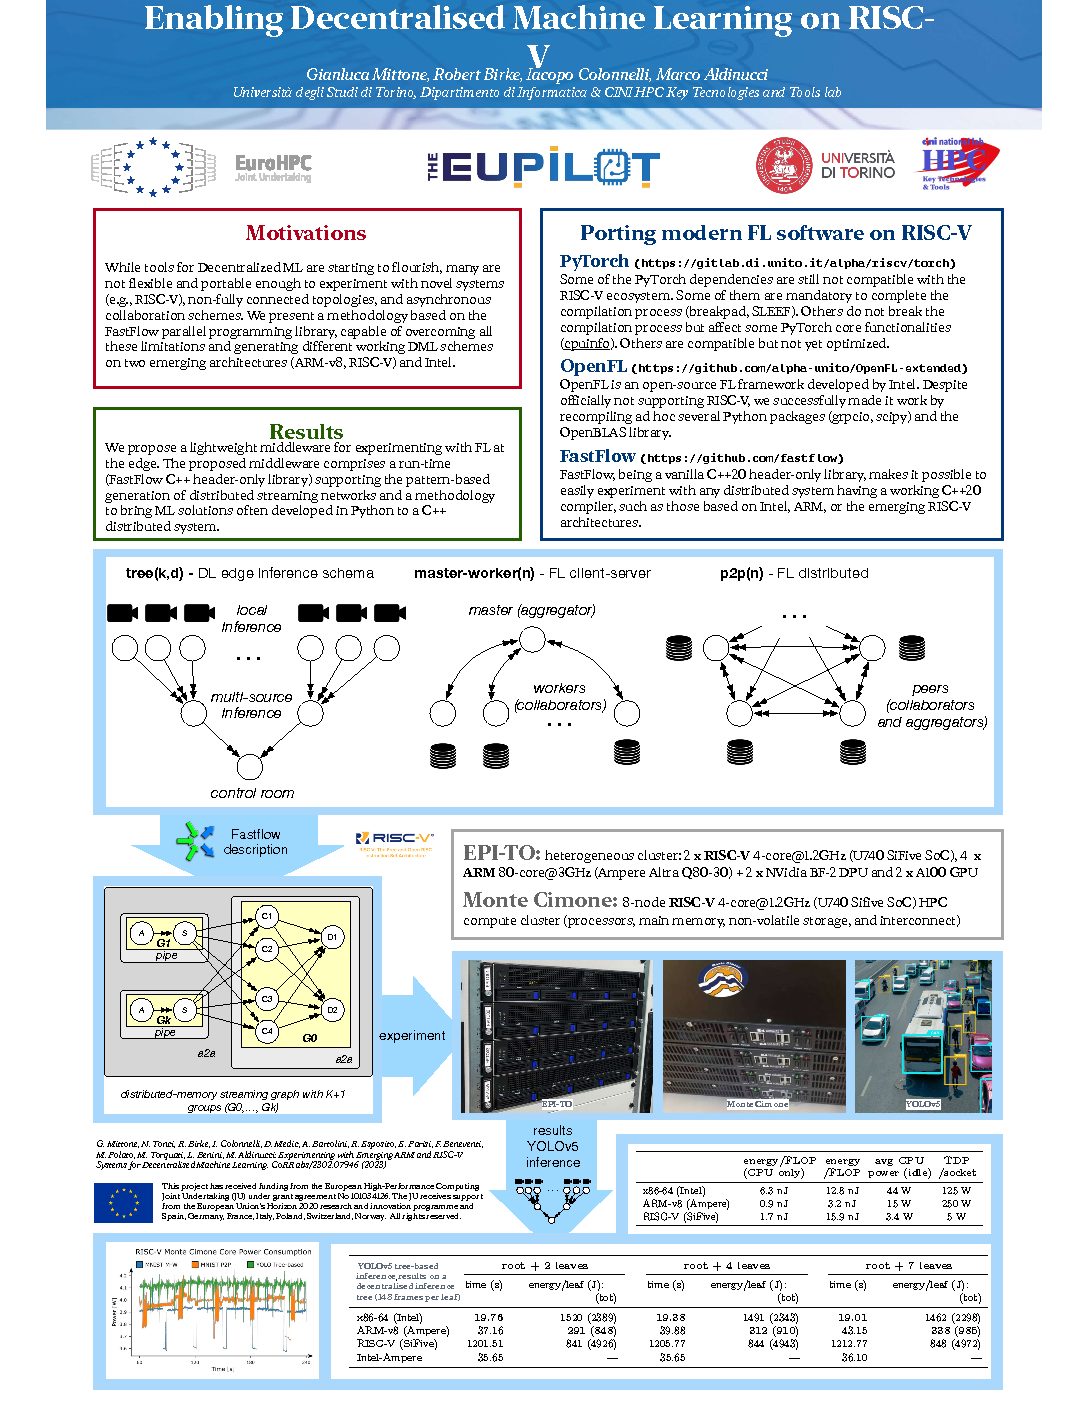 EuroHPC Summit 2023 Poster: Enabling Decentralised Machine Learning on RISCV